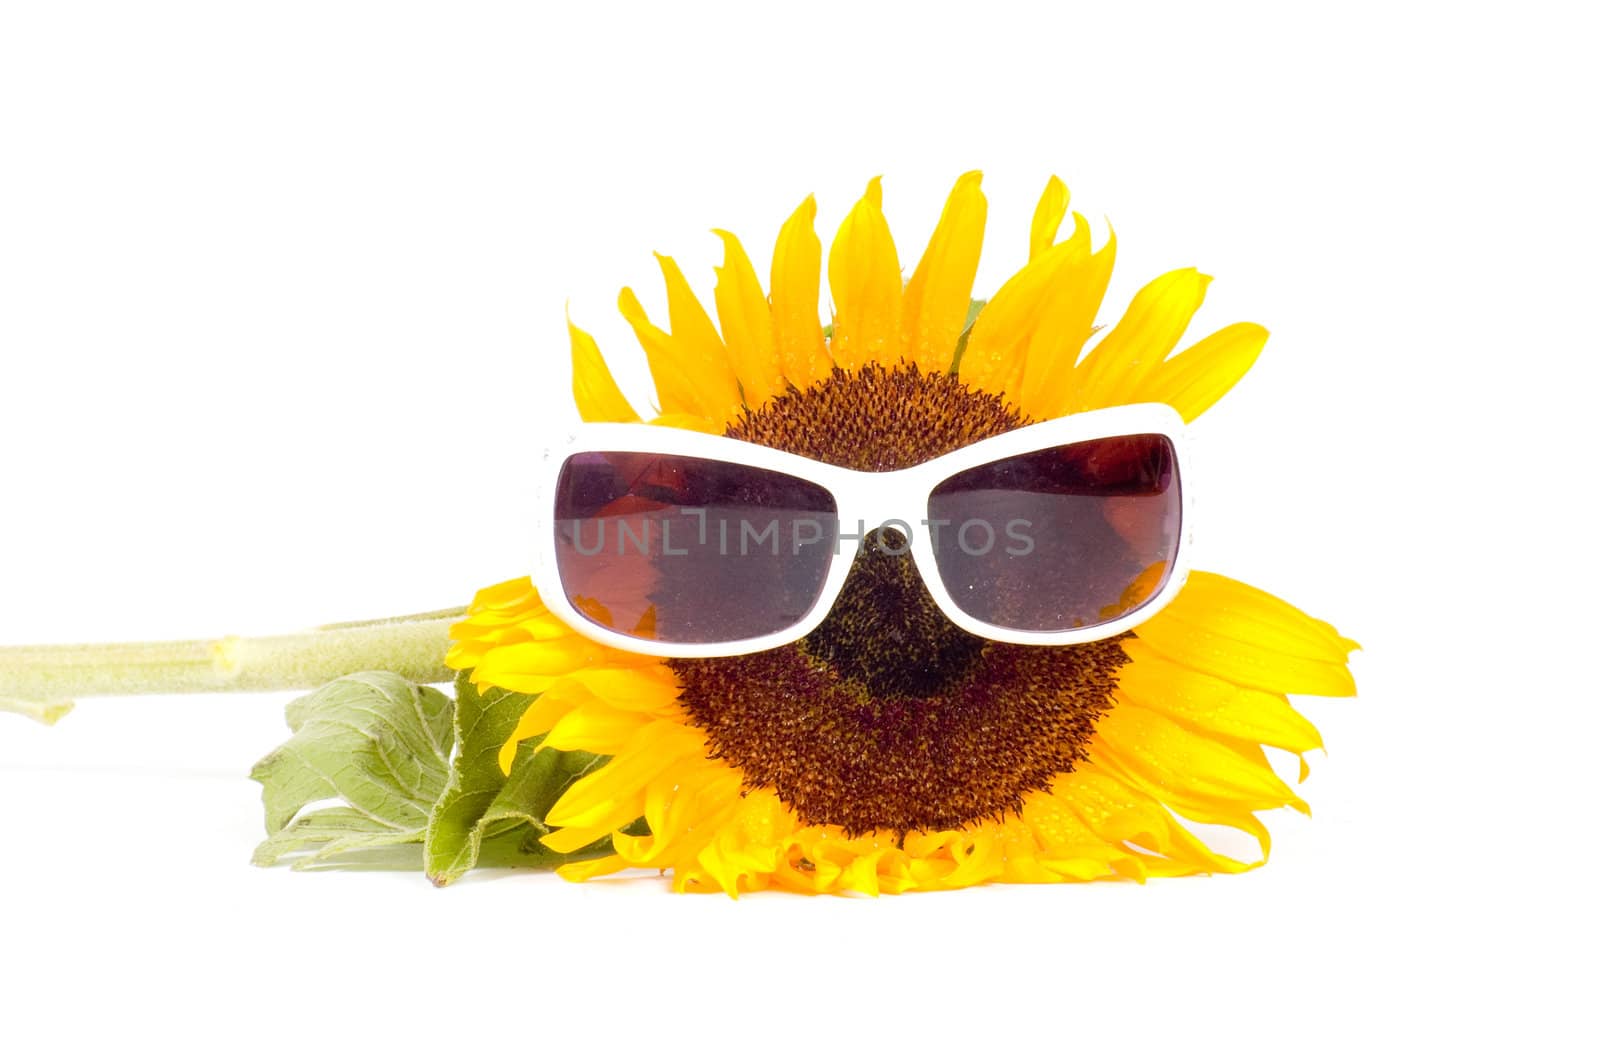 sunflower wearing sunglasses by ladyminnie